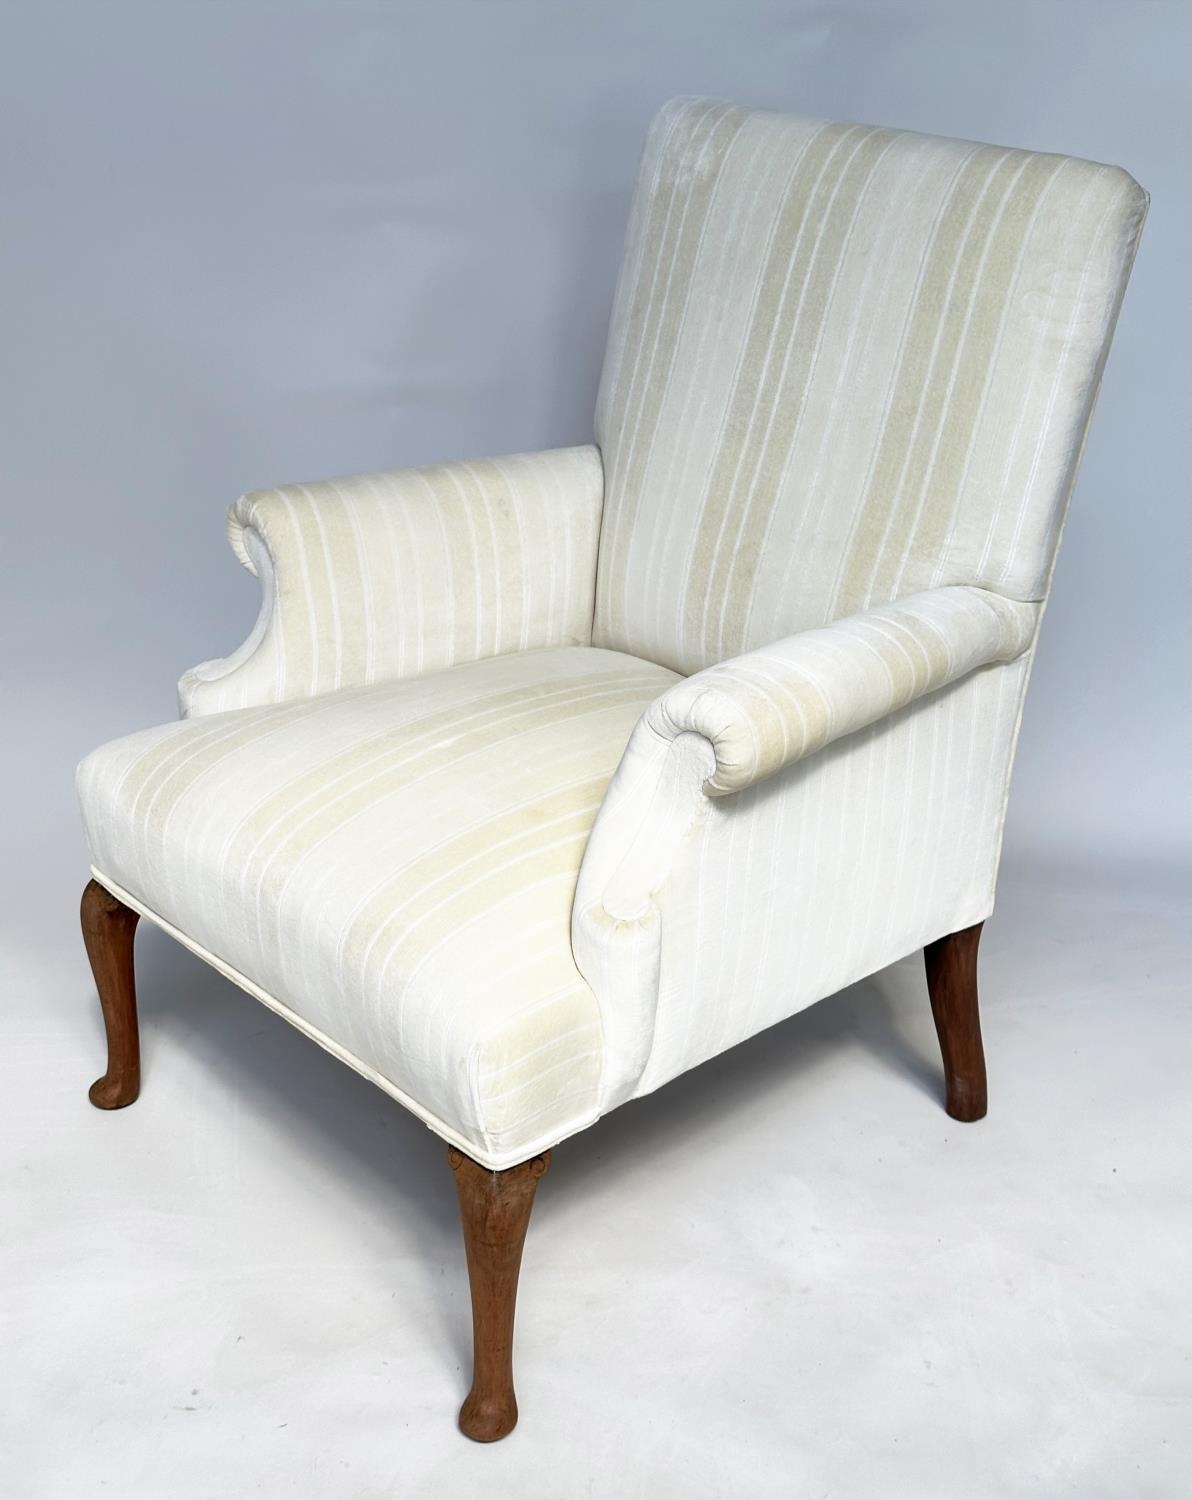 SCROLL ARMCHAIR, Edwardian style recently reupholstered, in neutral woven strip cotton with shaped - Image 2 of 5